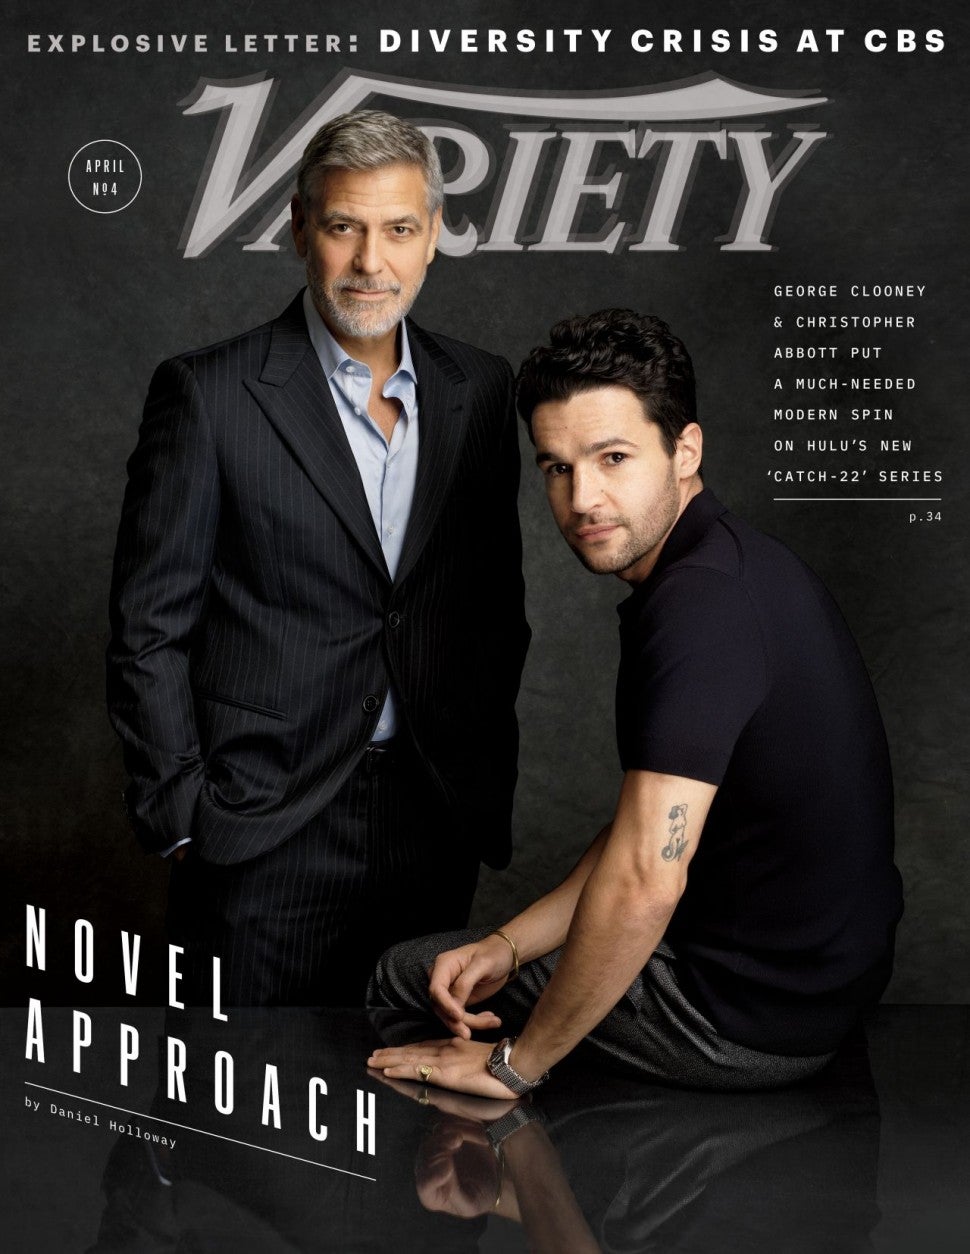 George Clooney and Christopher Abbott